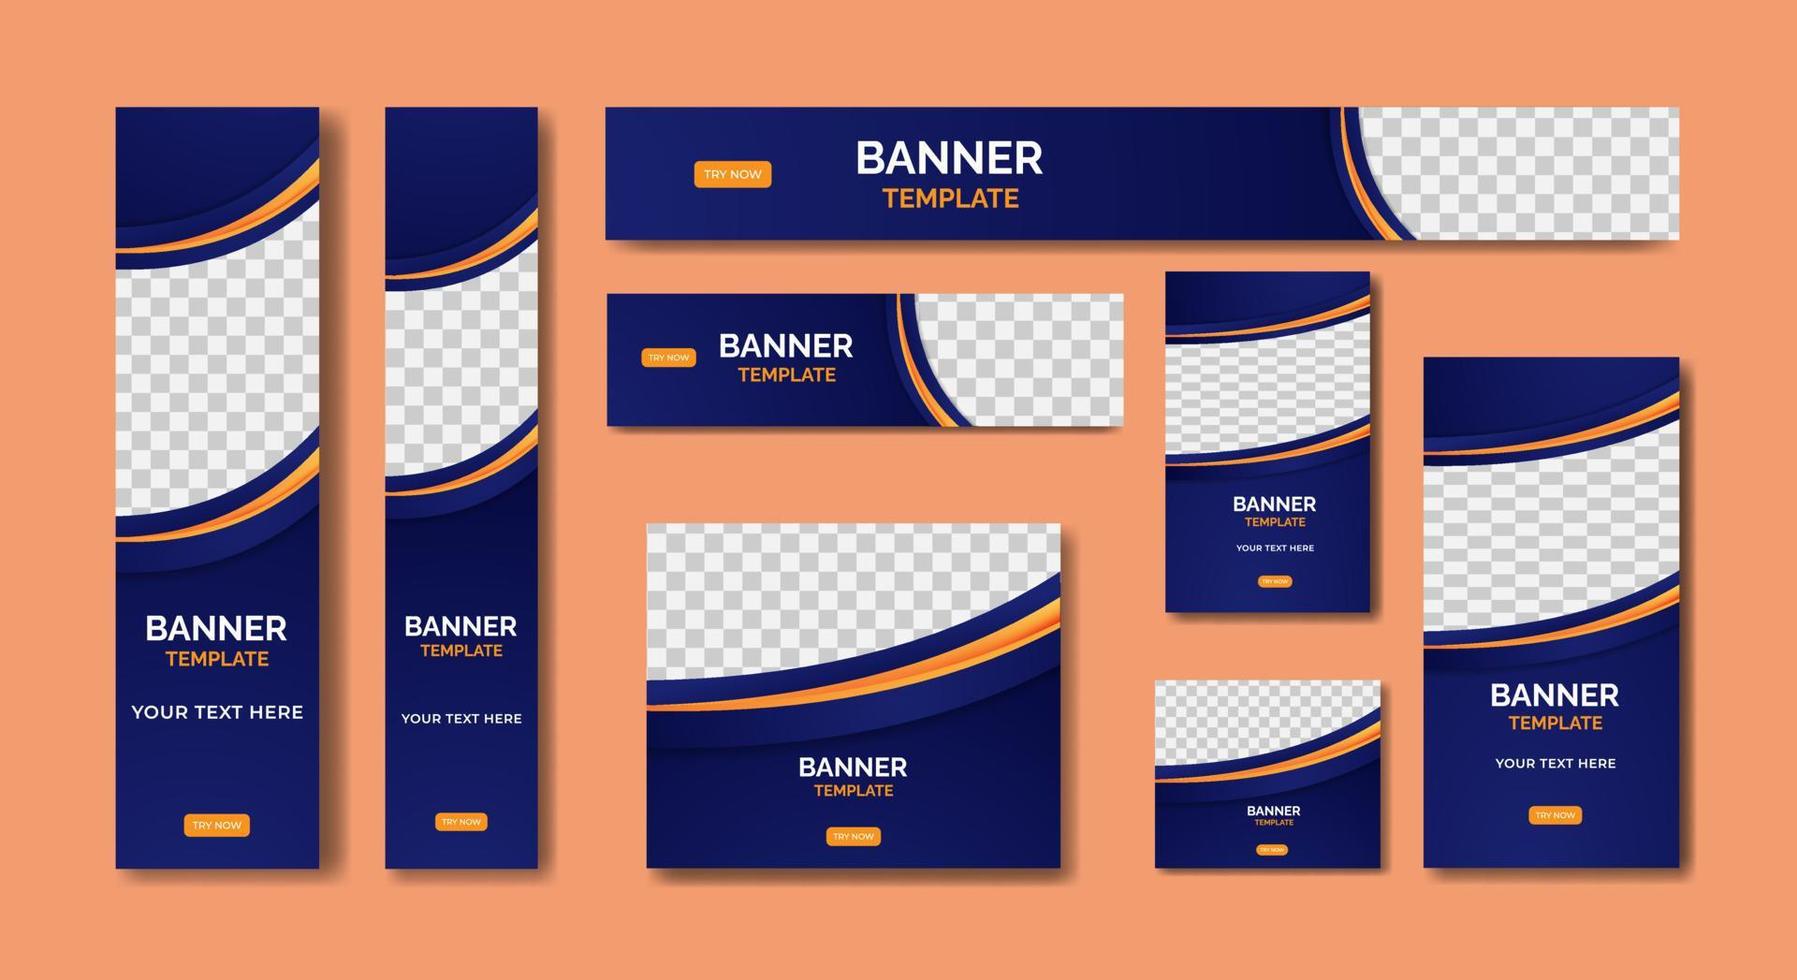 Ad Banner Template Design vector